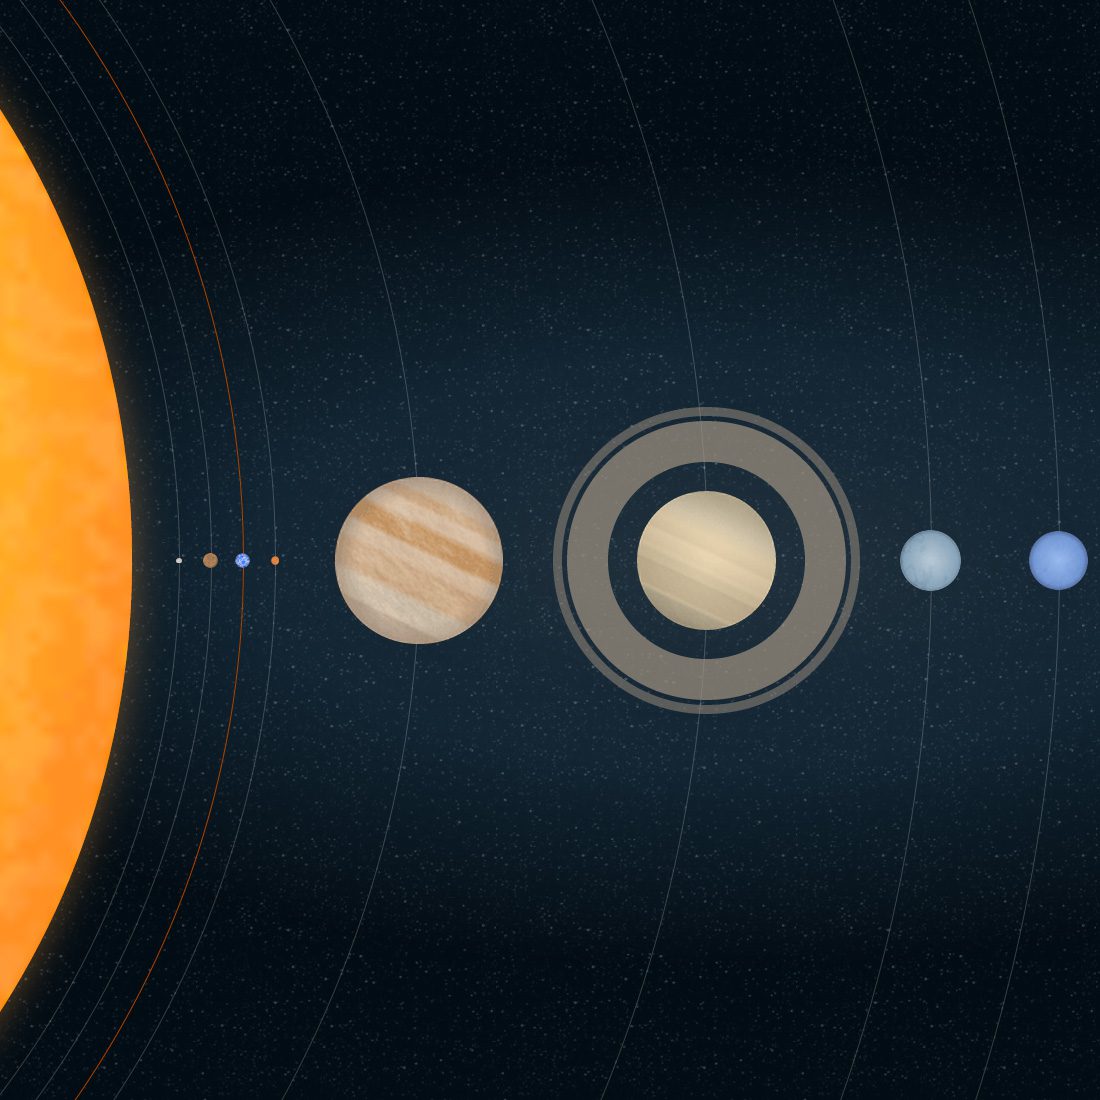 Distances Between The Planets Of The Solar System The Planets